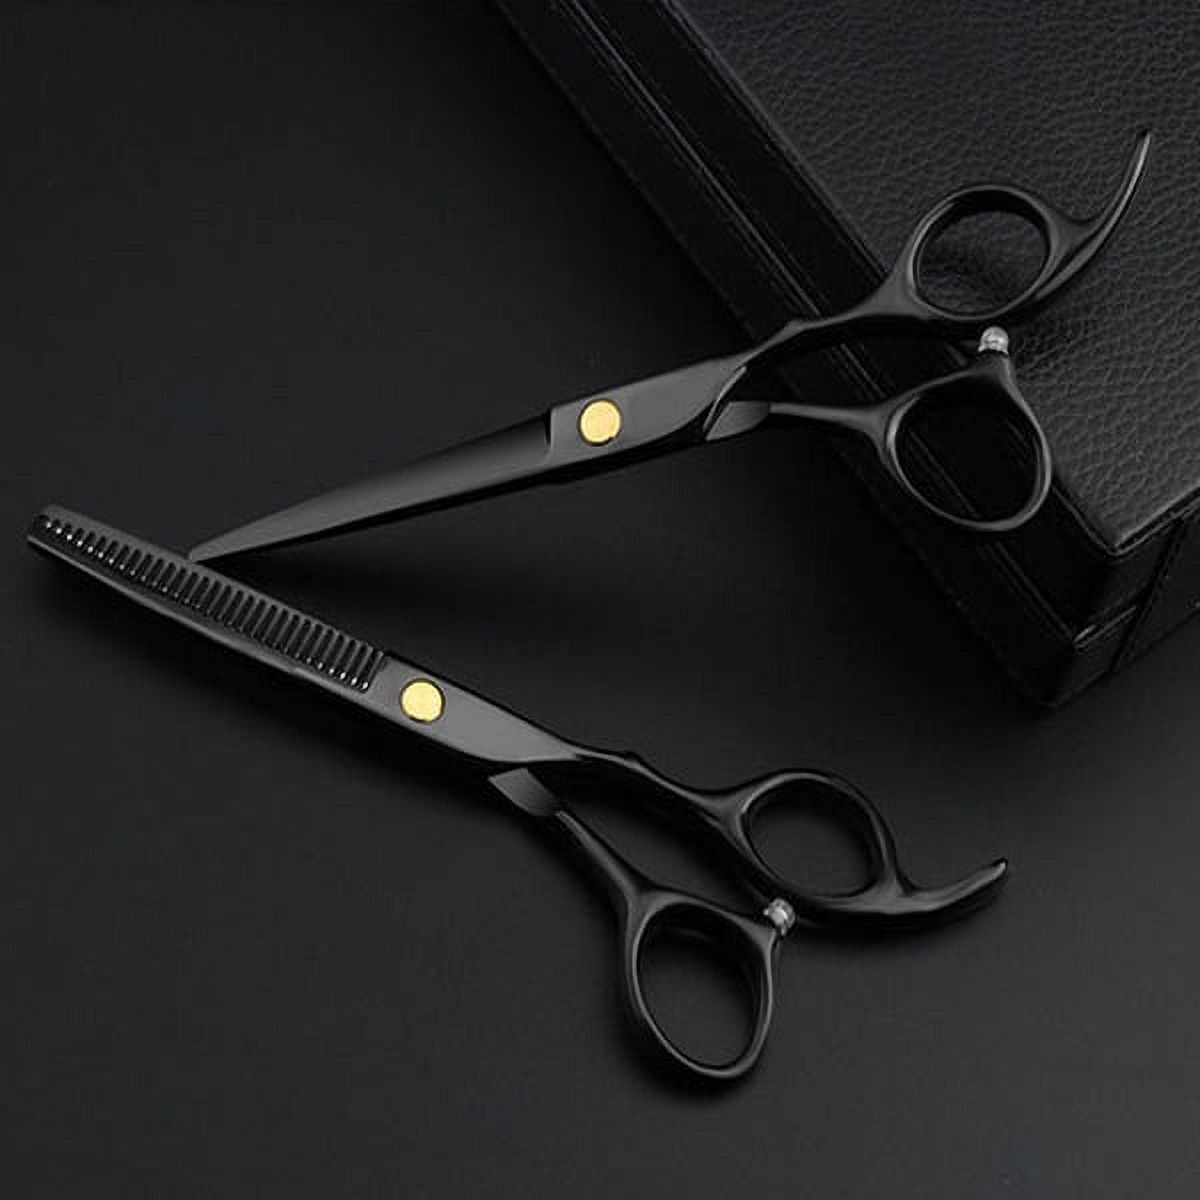 Willstar 3/9pcs Hair Cutting Scissors Set Professional Stainless Steel Barber Thinning Scissors for Barber Salon and Home - image 7 of 16